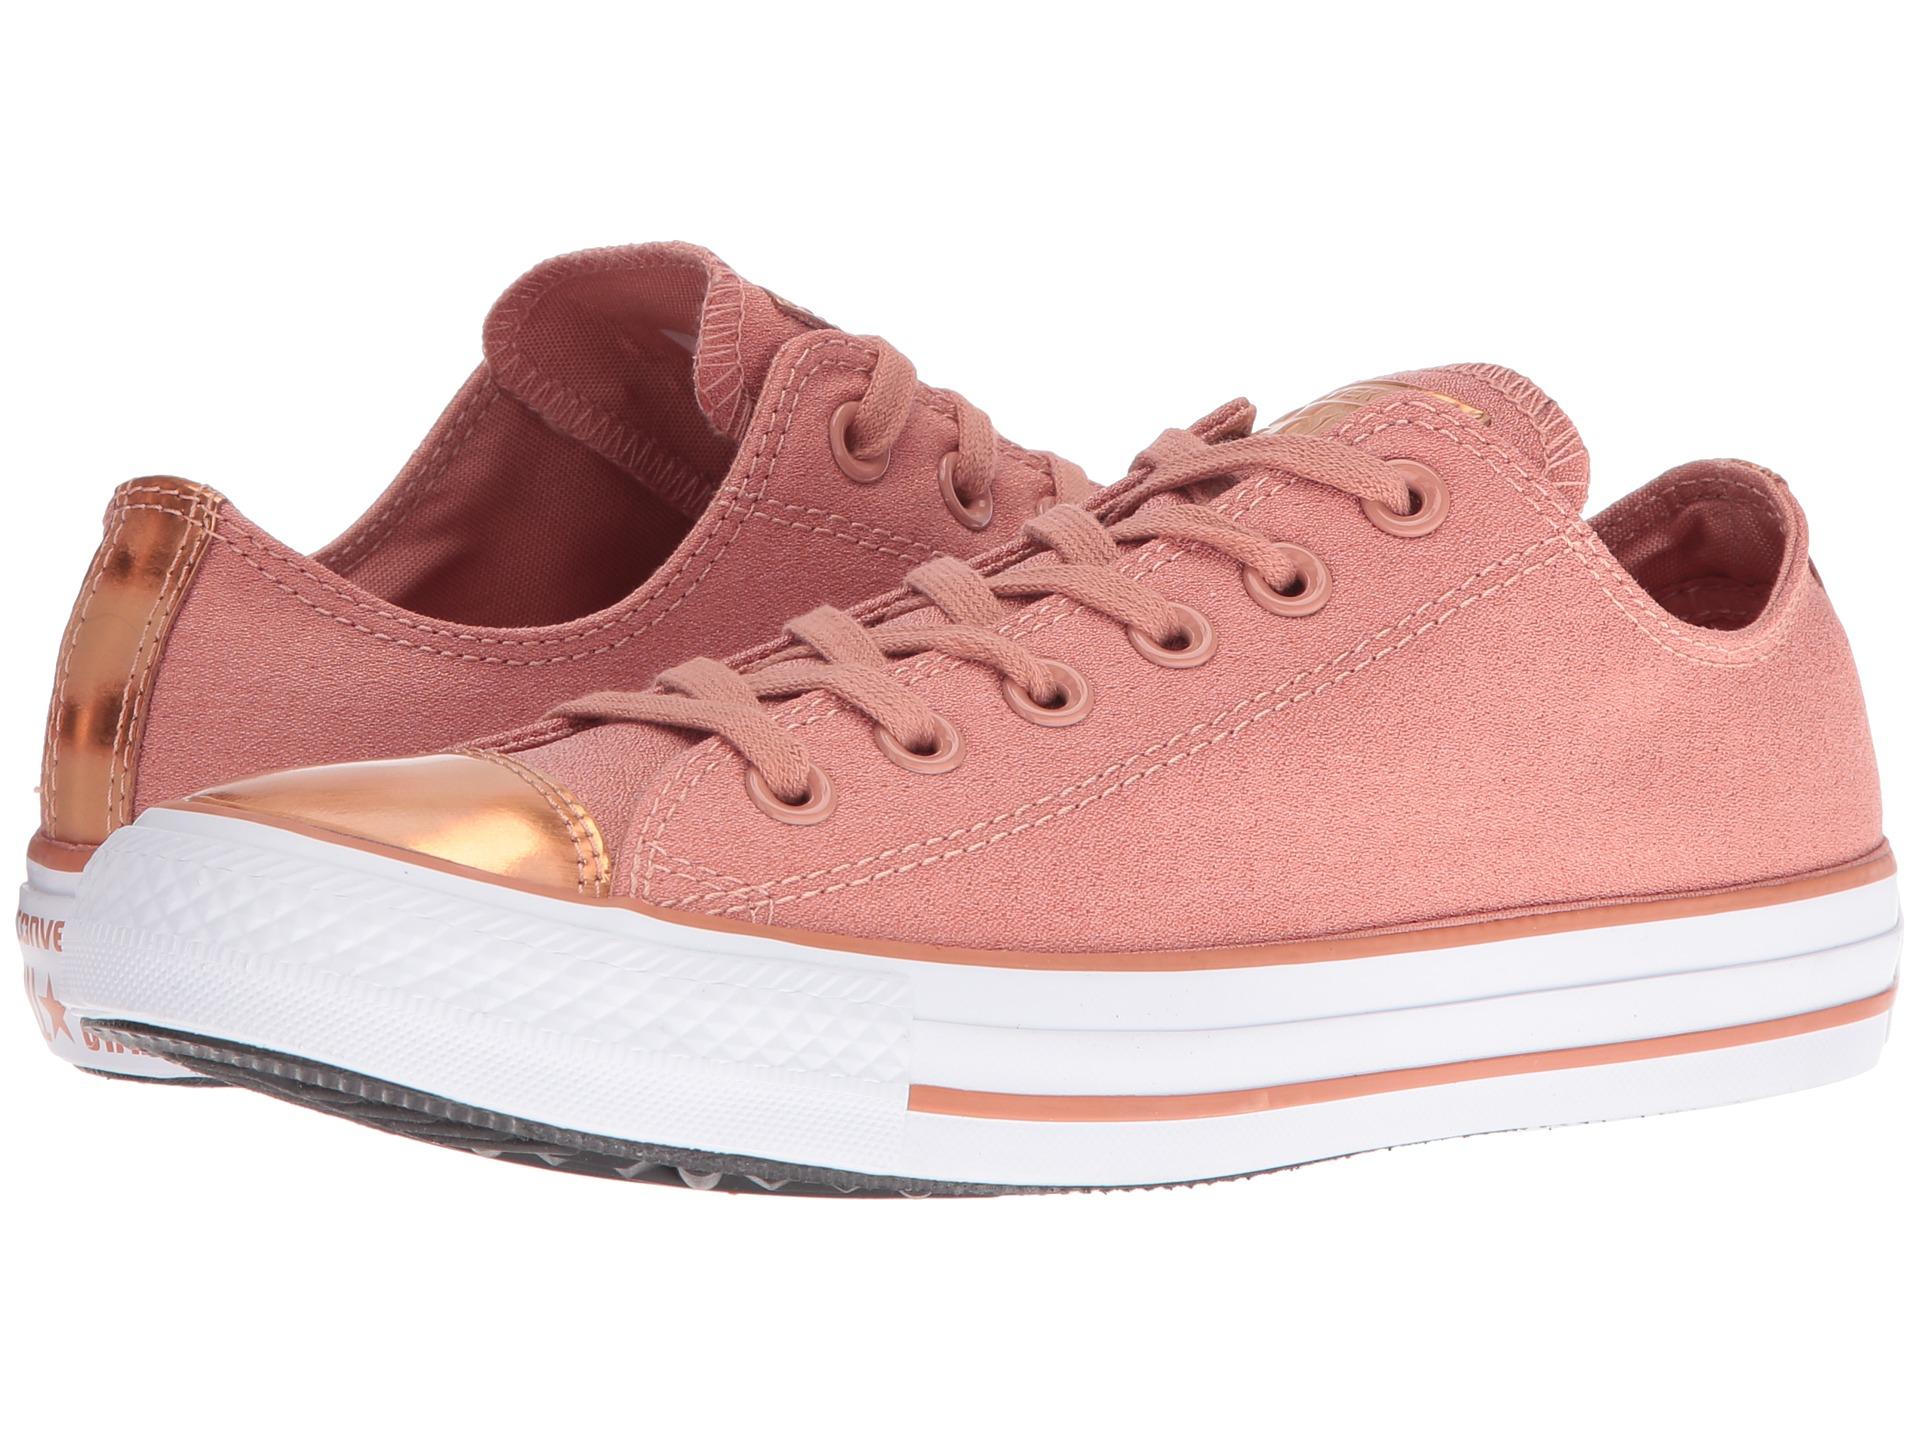 converse chuck taylor trainers in pink blush with metallic toe cap